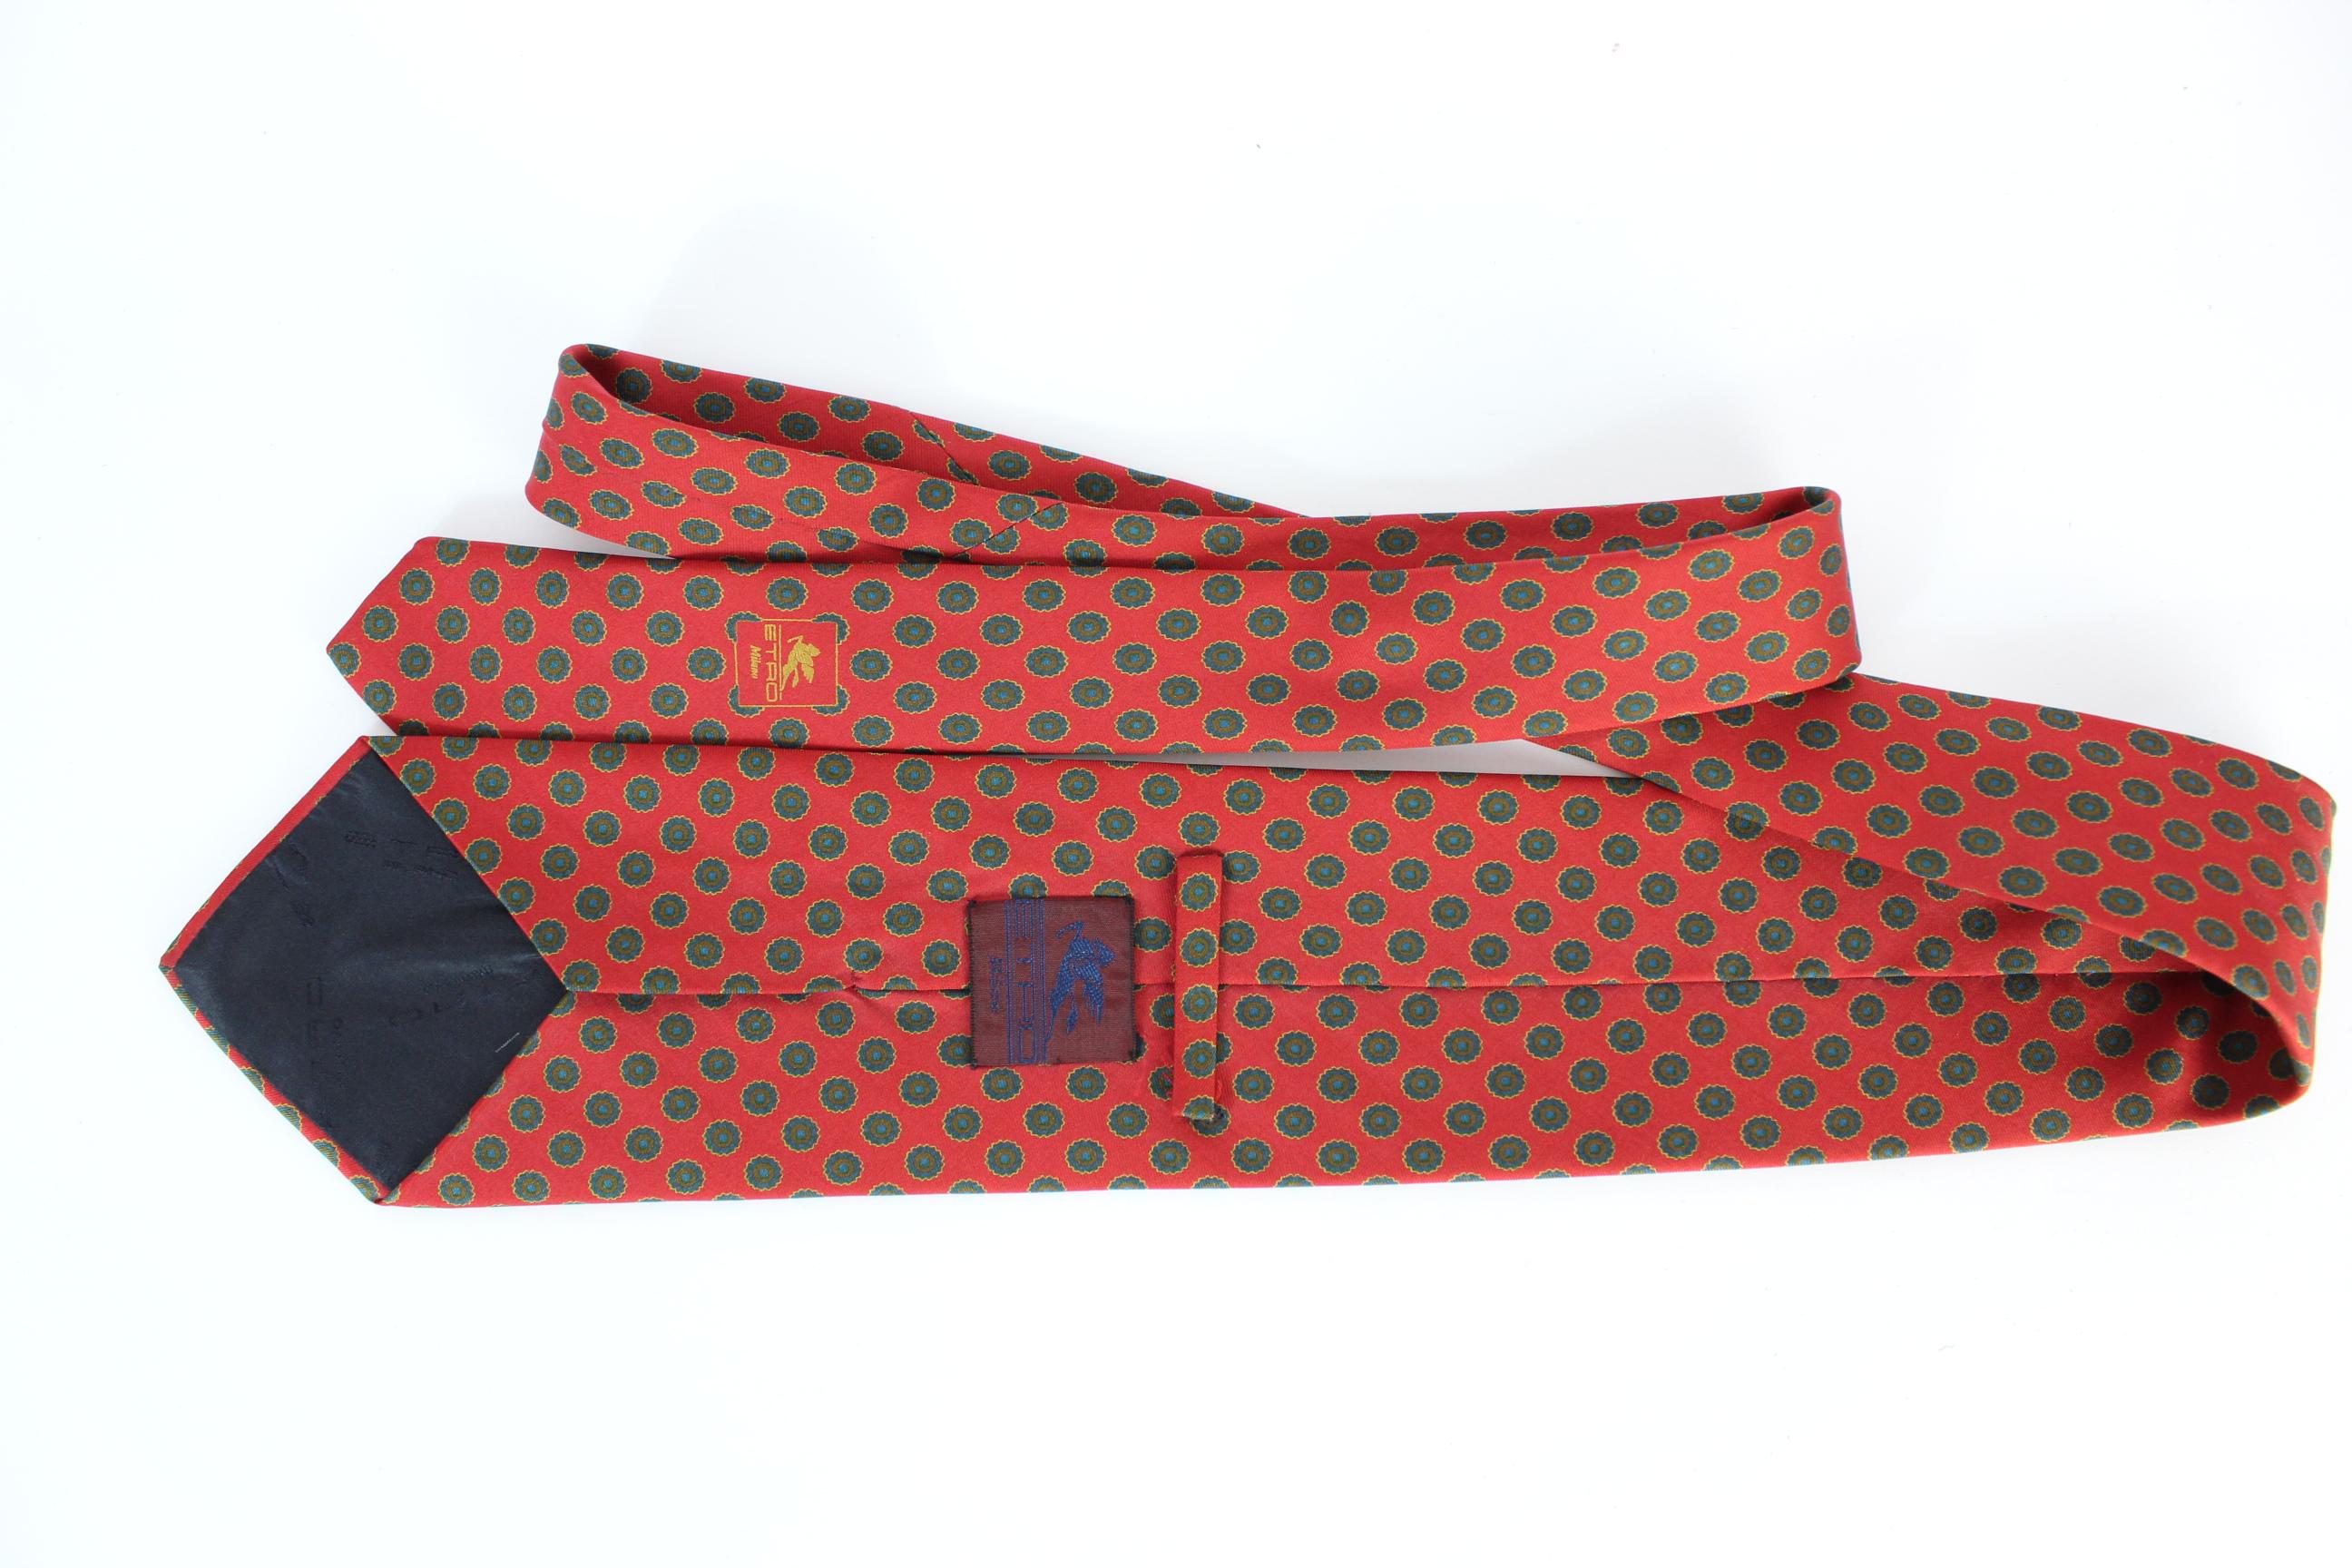 Etro 90s vintage tie. Red color with blue polka dot. 100% silk. Made in Italy. Excellent vintage condition.

Length: 150 cm
Width: 10 cm